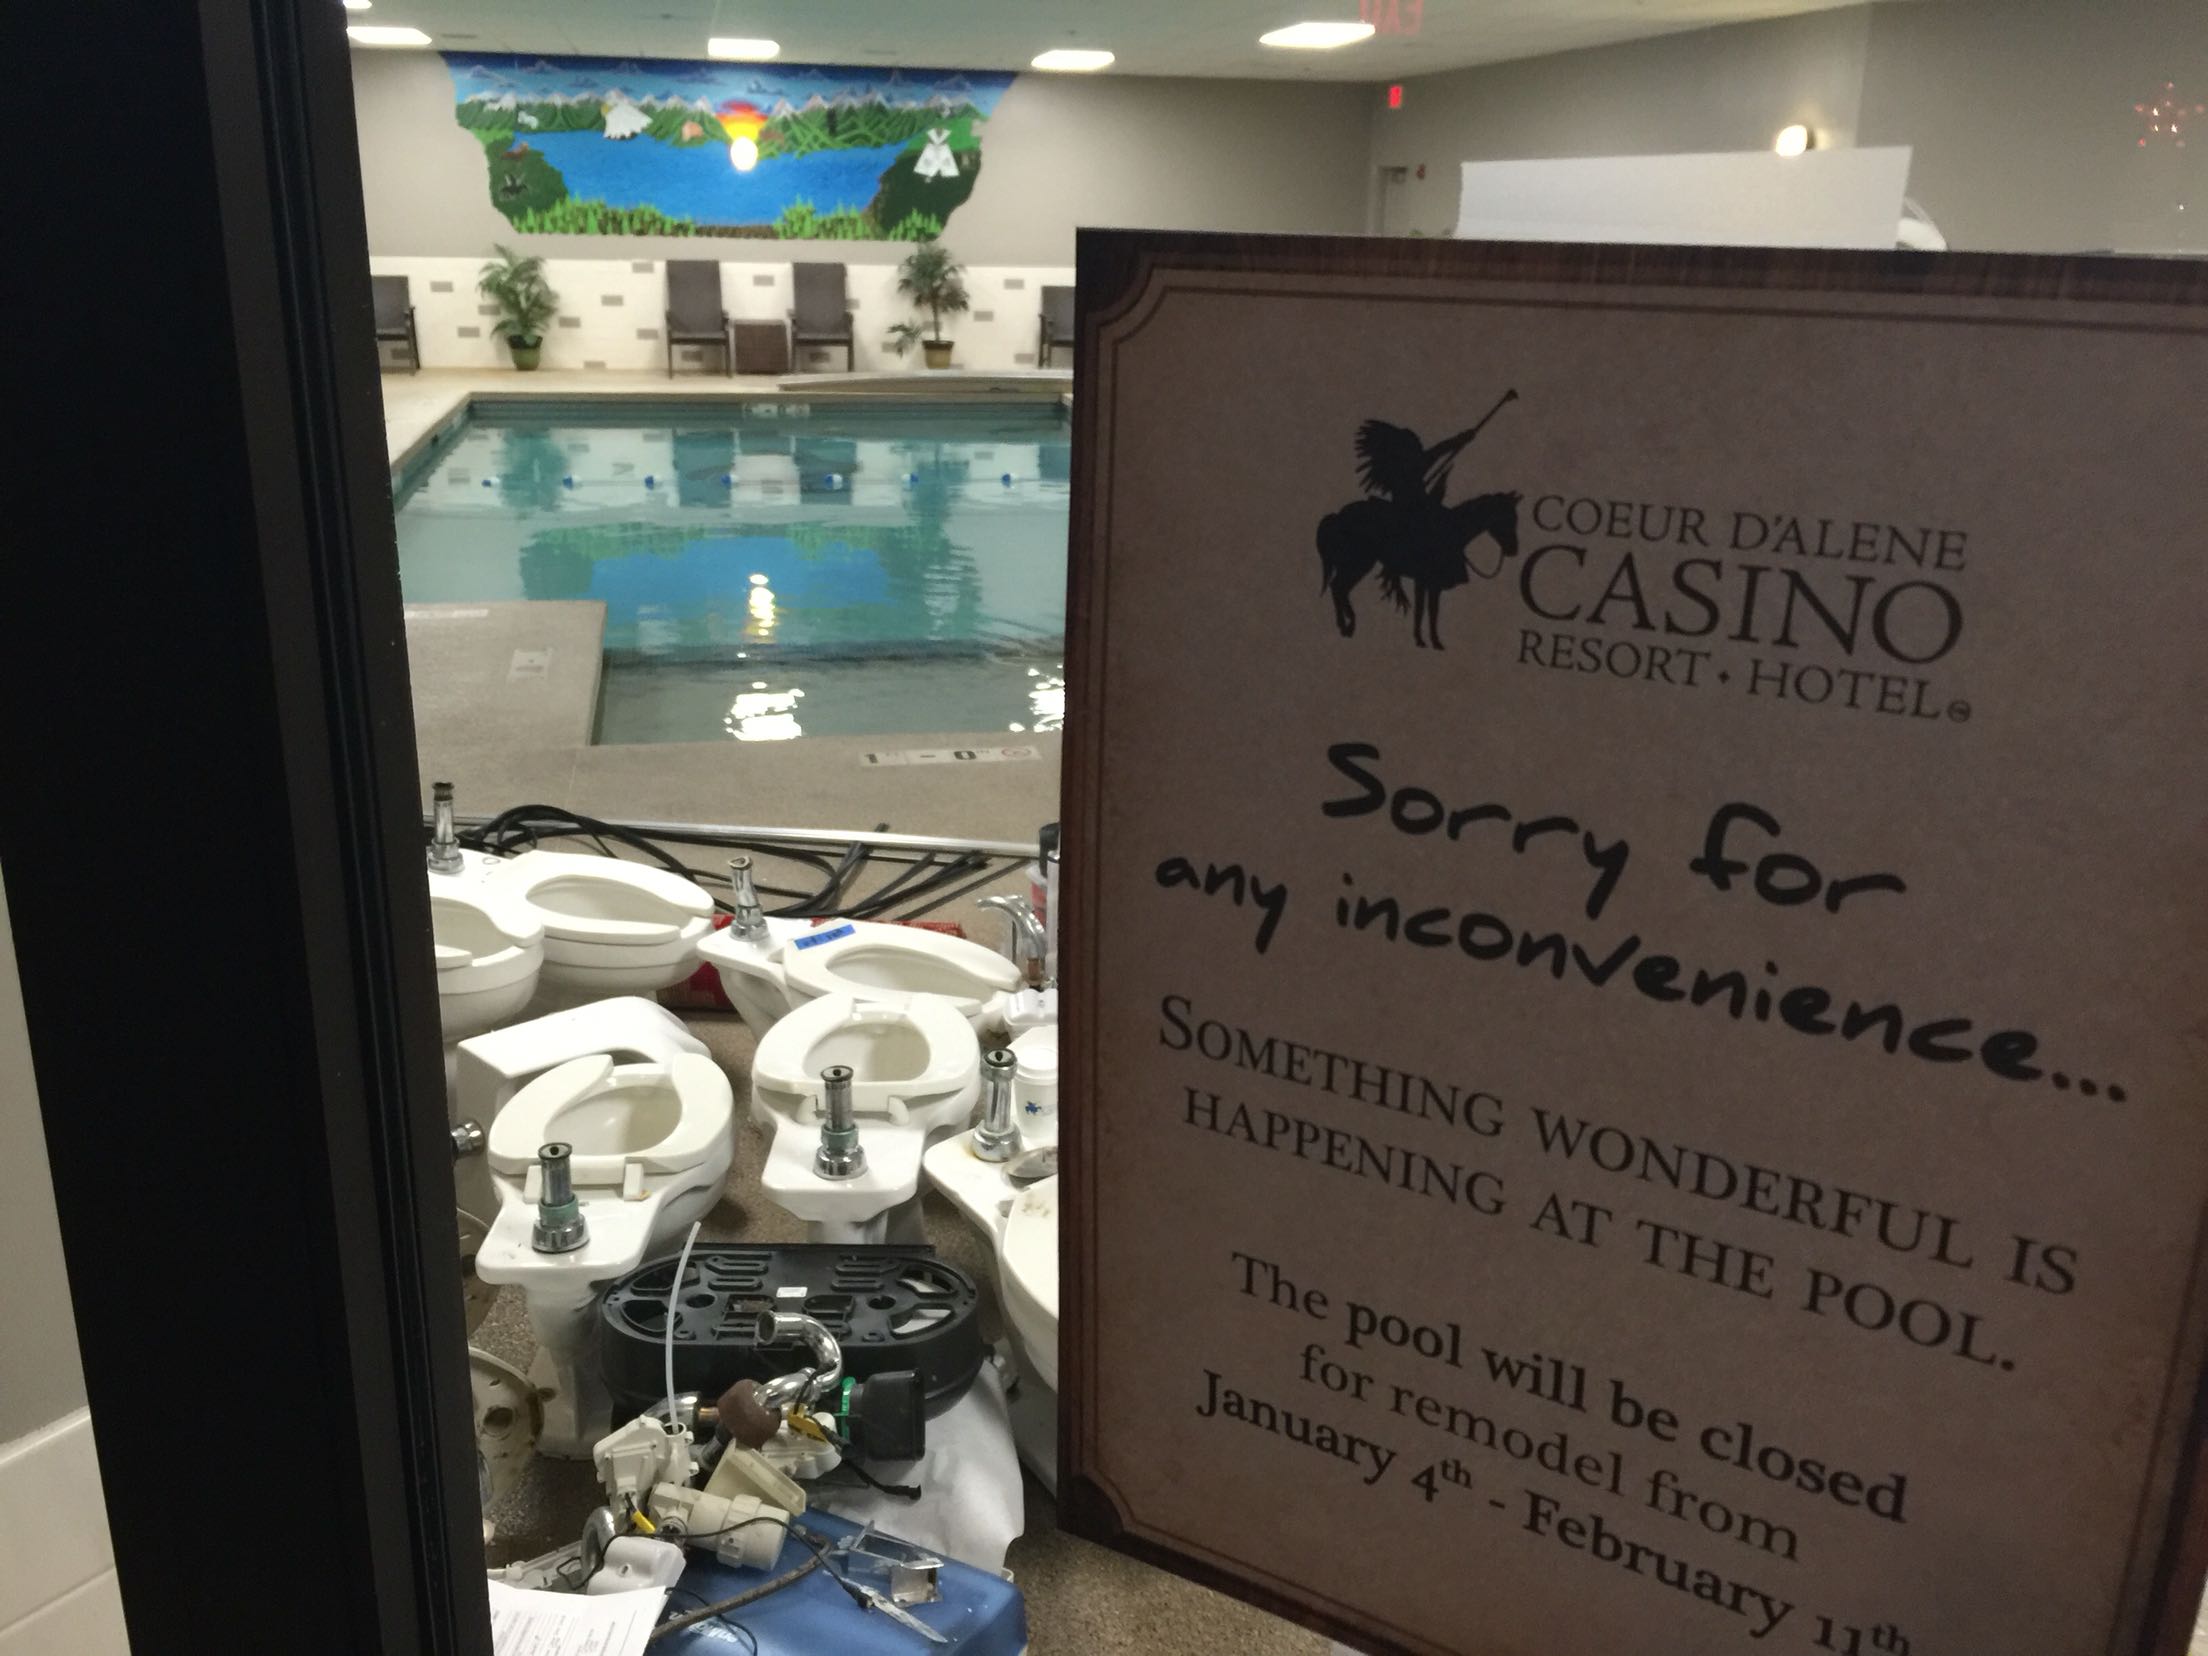 Coeur D'Alene Casino Resort Hotel Sorry for any inconvenience... Something Wonderful Is Happening At The Pool. The pool will be closed for remodel from January 4th February 11th